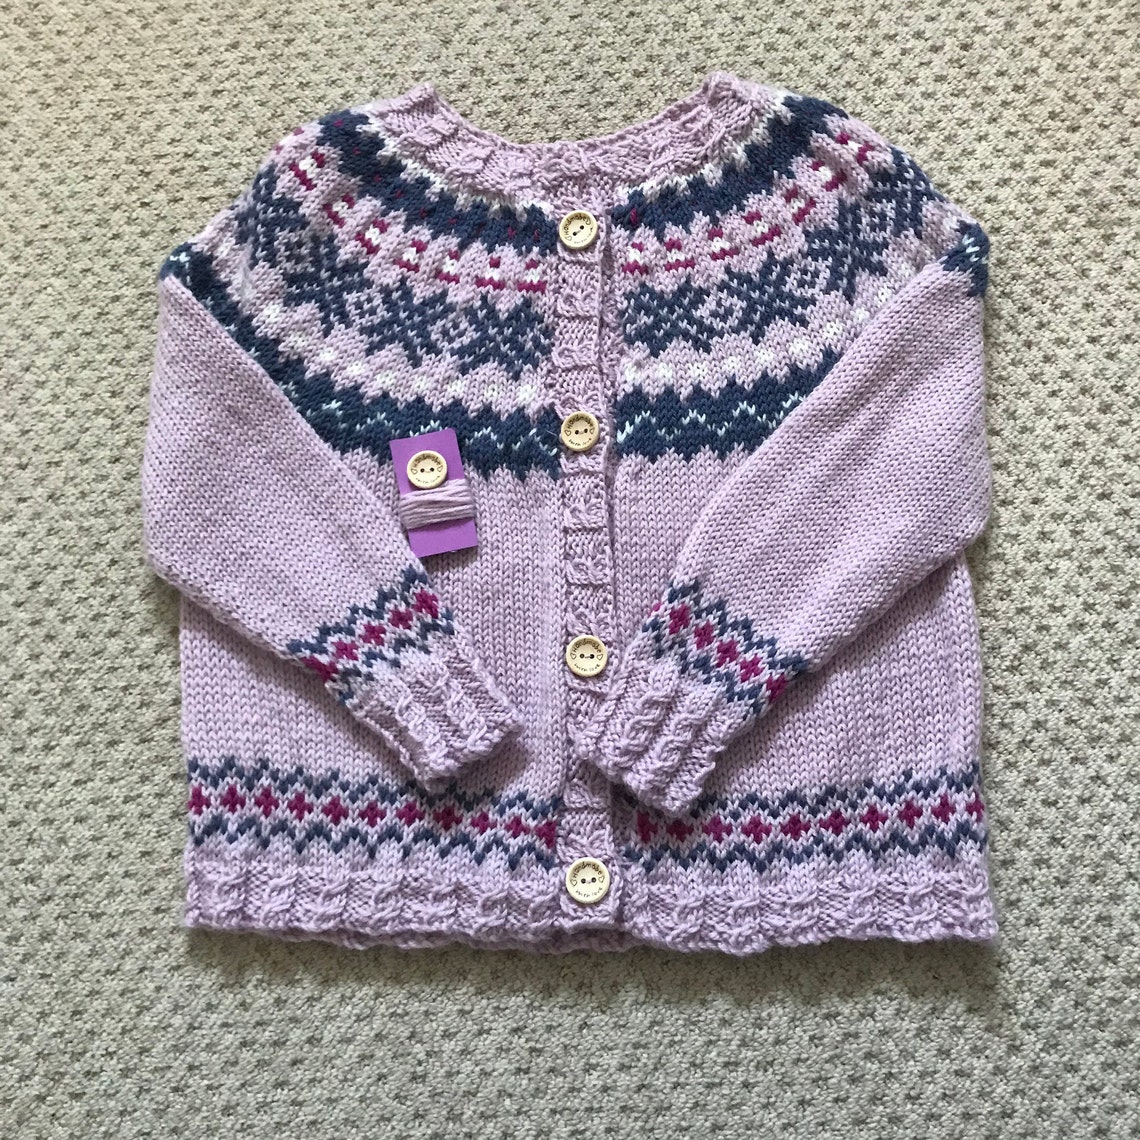 Handknitted wool fair isle Jacket in lilac / pink Size Age 3 | Etsy